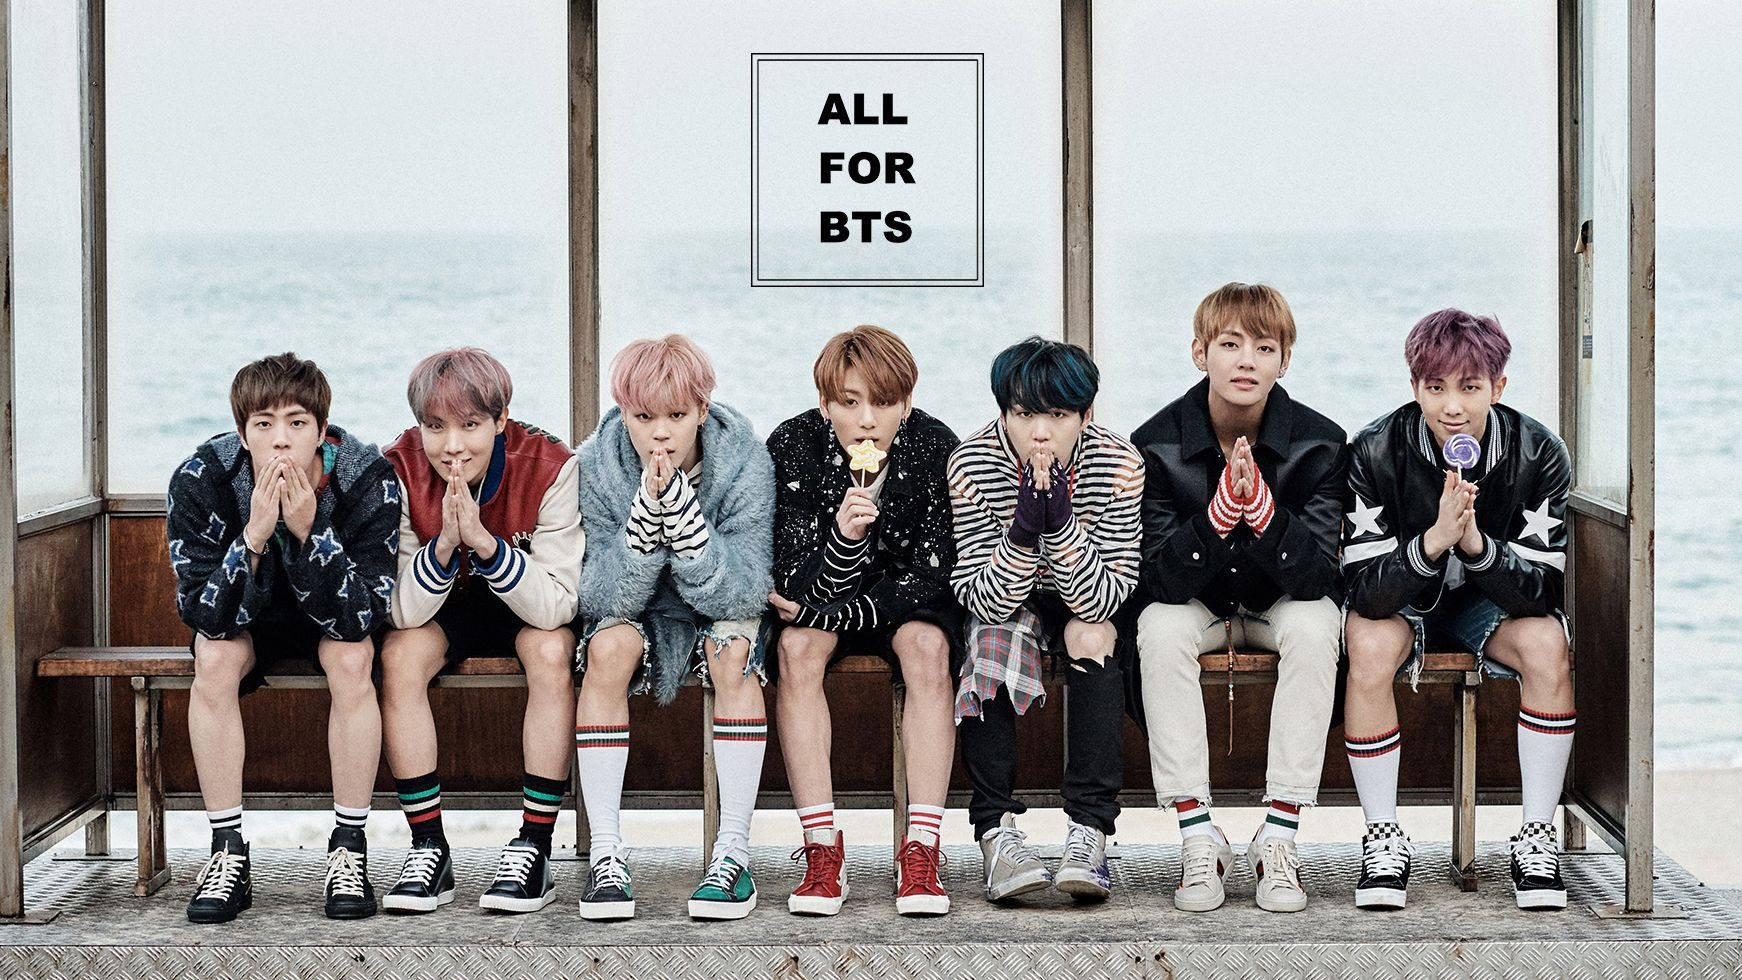 All For Bts